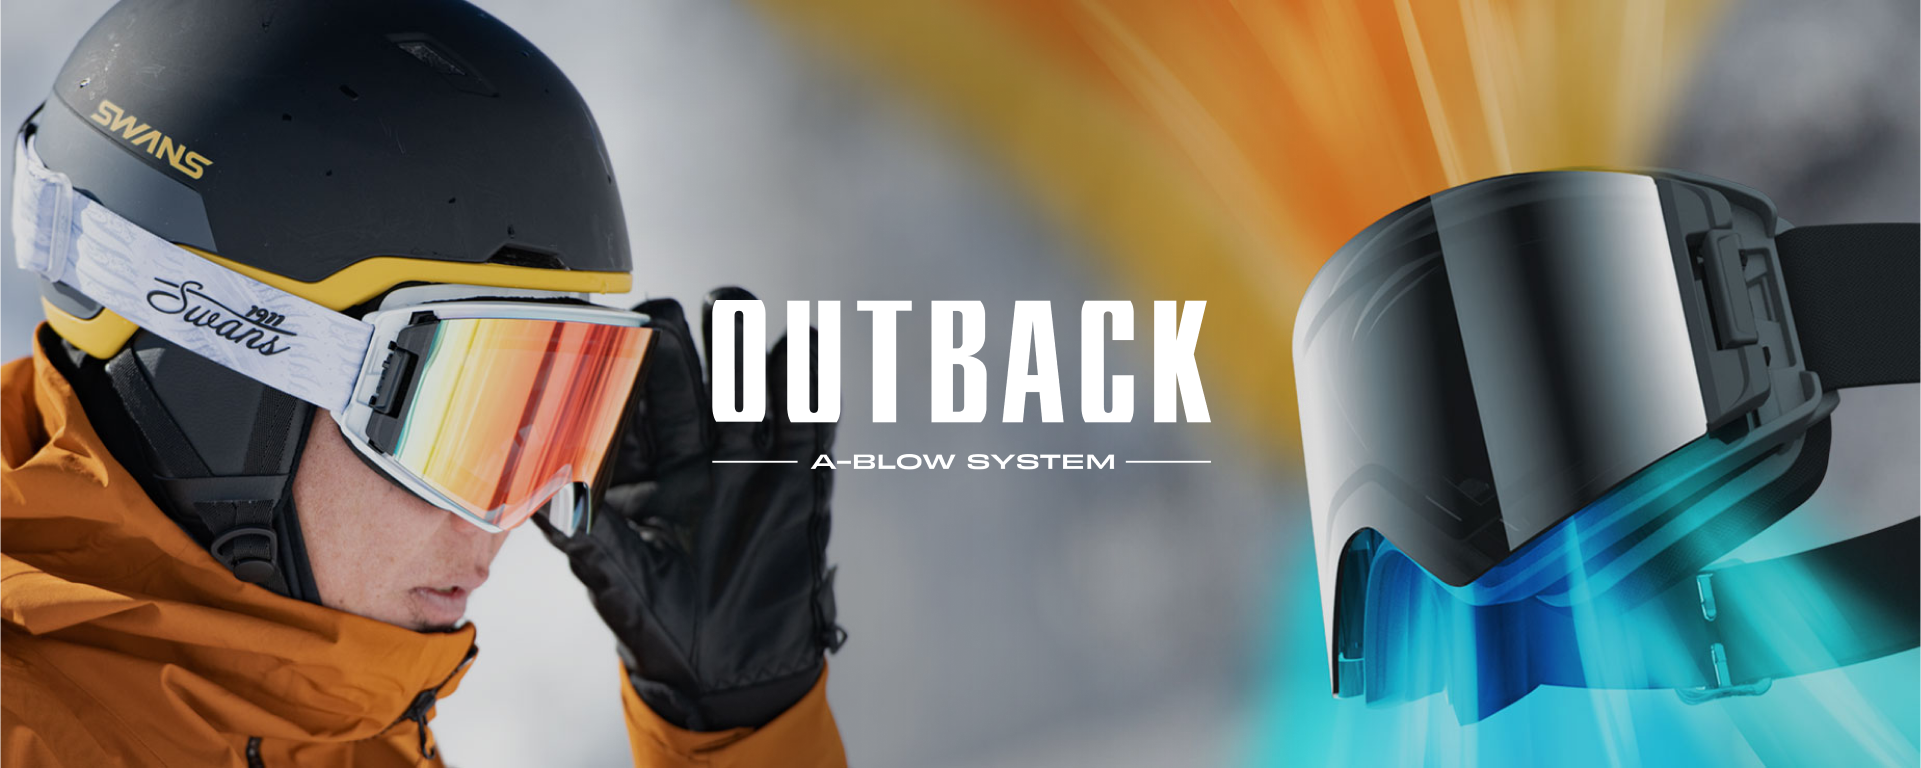 OUTBACK banner